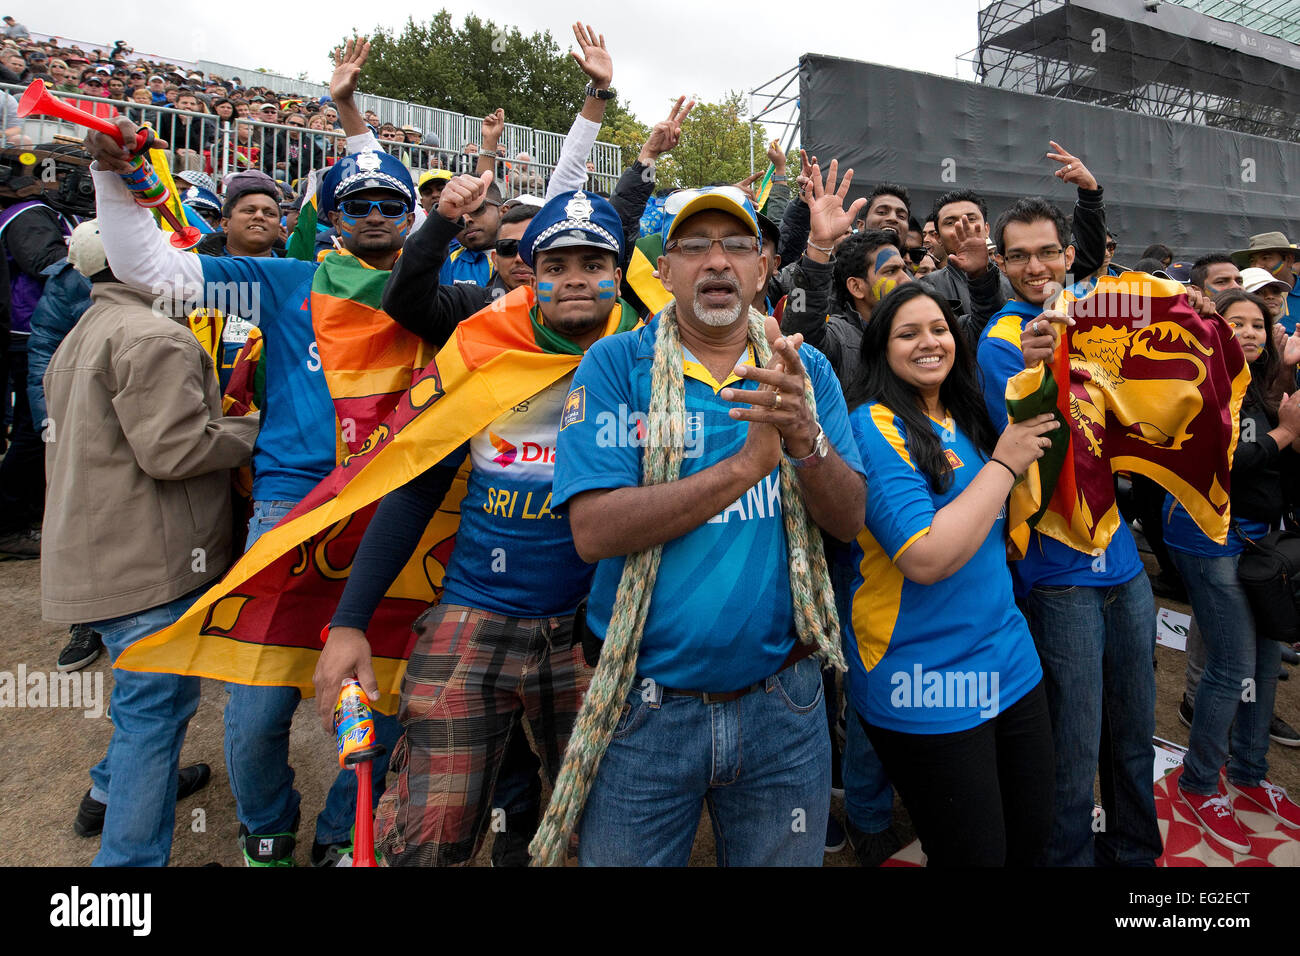 Christchurch, New Zealand, Feature. 14th Feb, 2015. Christchurch, New Zealand - February 14, 2015 - Fans of Sri Lanka celebrate during the ICC Cricket World Cup Match between Sri Lanka and New Zealand at Hagley Oval on February 14, 2015 in Christchurch, New Zealand, Feature. © dpa/Alamy Live News Stock Photo